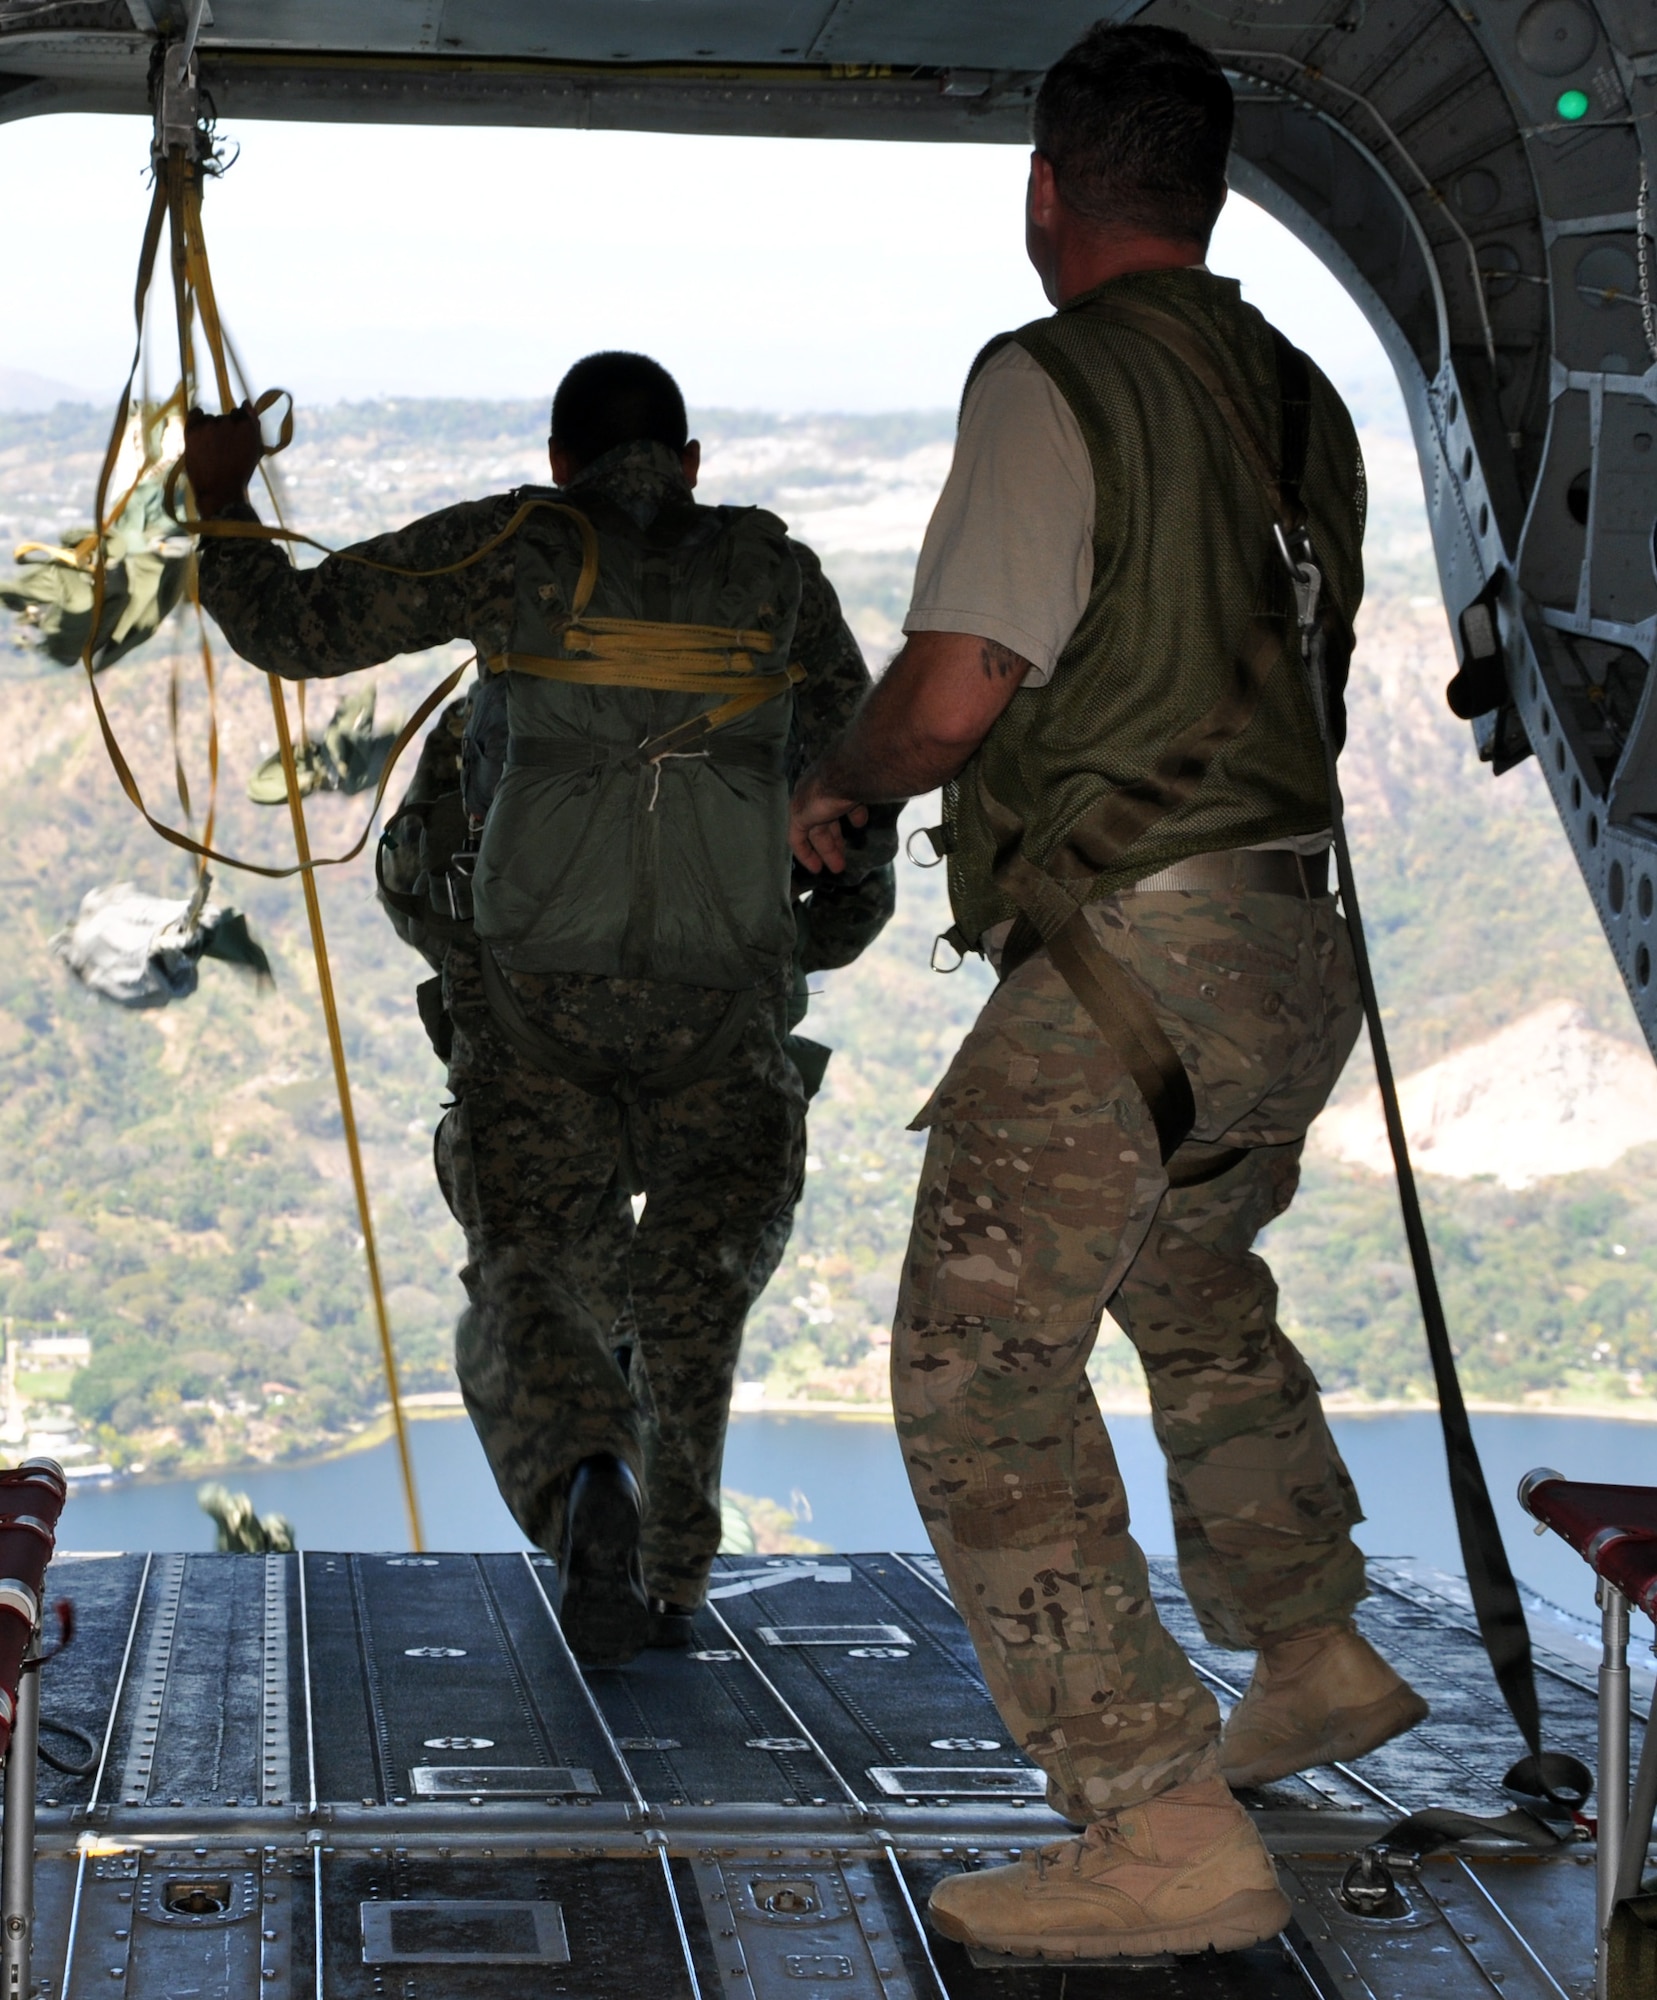 A jumpmaster looks on as a member of the El Salvadoran military jumps from the ramp of a CH-47 Chinook helicopter during a joint airborne operations training exercise conducted by U.S. Special Forces and El Salvadoran servicemembers over Lake Ilopango, El Salvador, Jan. 21, 2014.  U.S. Special Forces from the 7th Special Forces Group (Airborne) conducted the training exercise alongside members of the El Salvadoran military.  The joint-training, overwater static jump allowed members from both nations to maintain currency while strengthening the relationship between the U.S. and El Salvadoran forces.  Joint Task Force-Bravo’s 1-228th Aviation Regiment provided aerial support for the exercise, flying each chalk of jumpers from the Ilopango International Airport to the drop zone over Lake Ilopango.  (U.S. Air Force photo by Capt. Zach Anderson)